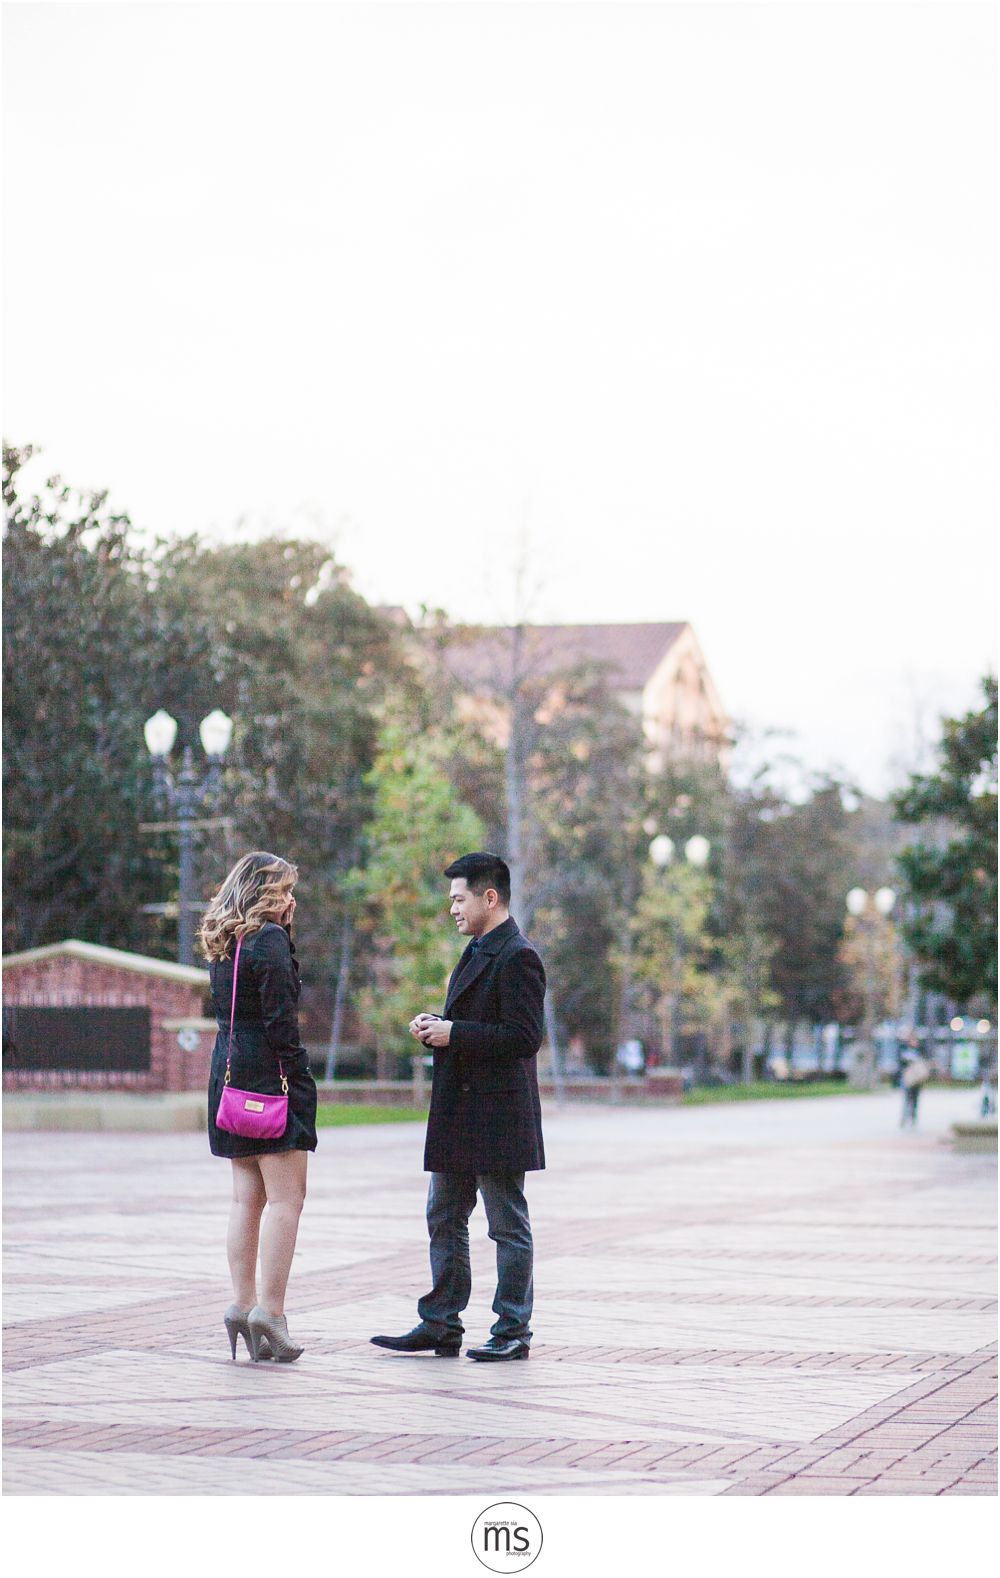 Vincent & Kami's Proposal Story at USC Margarette Sia Photography_0005